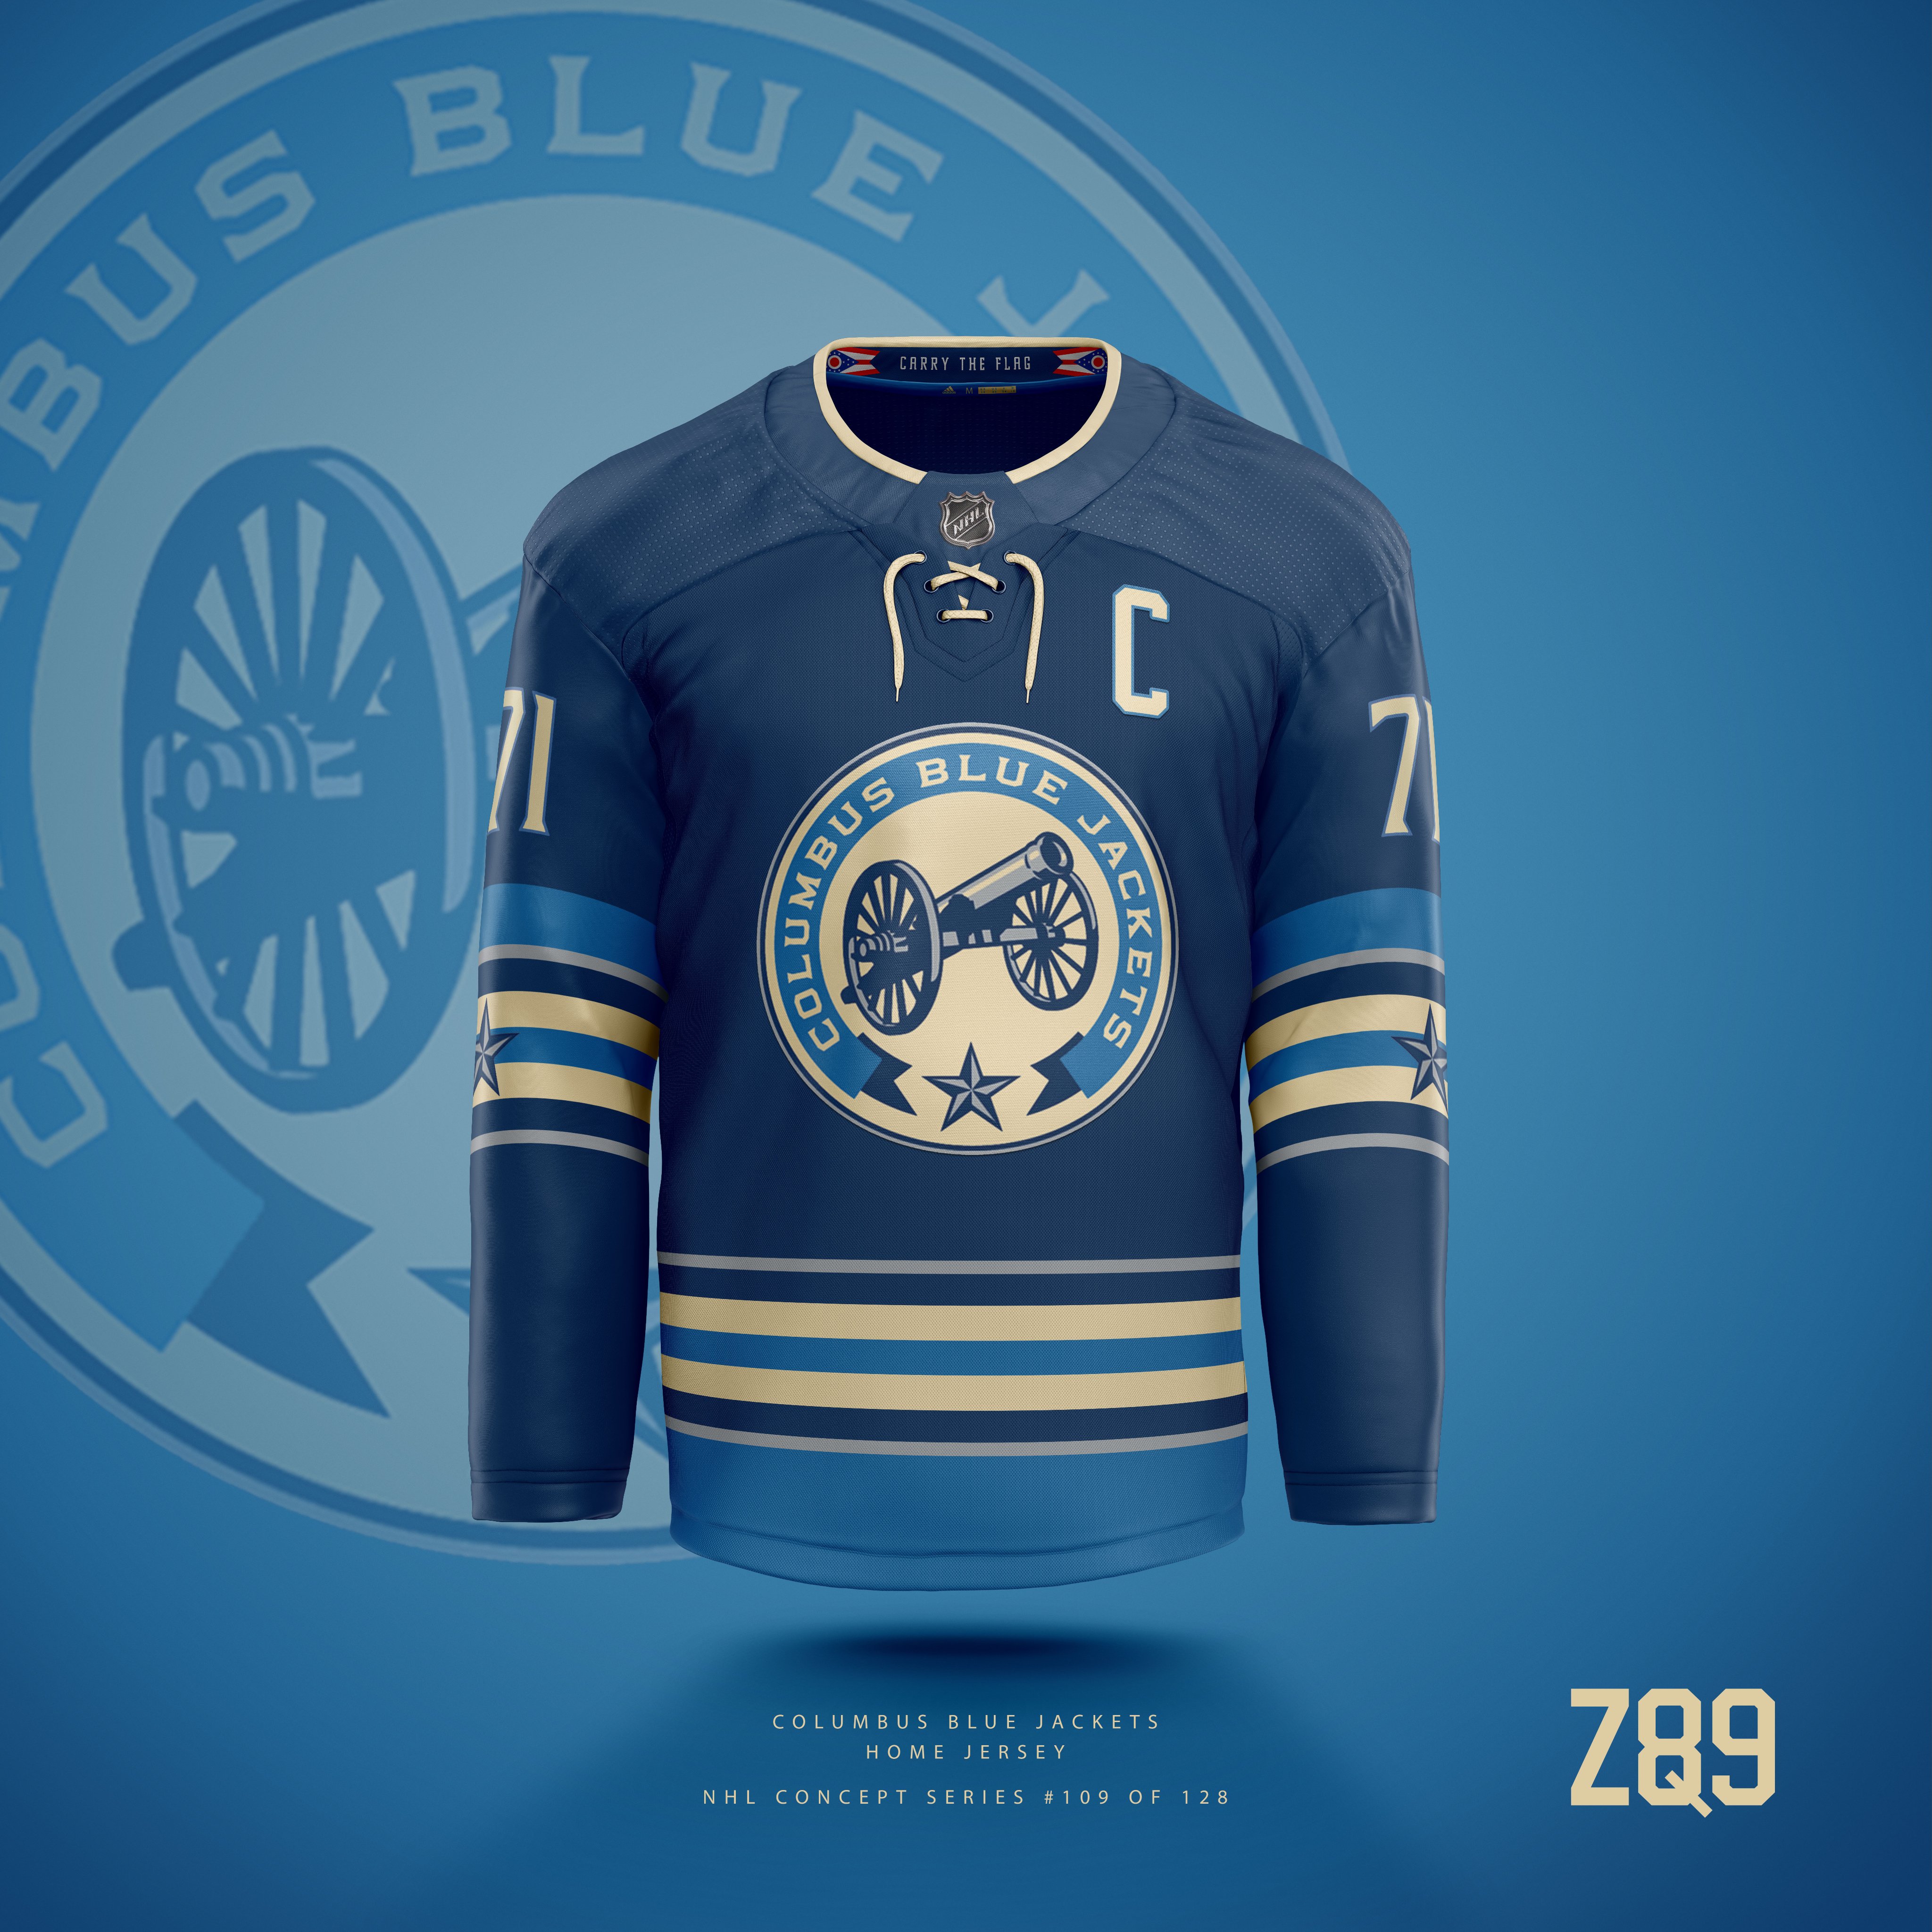 Z89Design on X: #CBJ Concepts! The cannon comes to the forefront